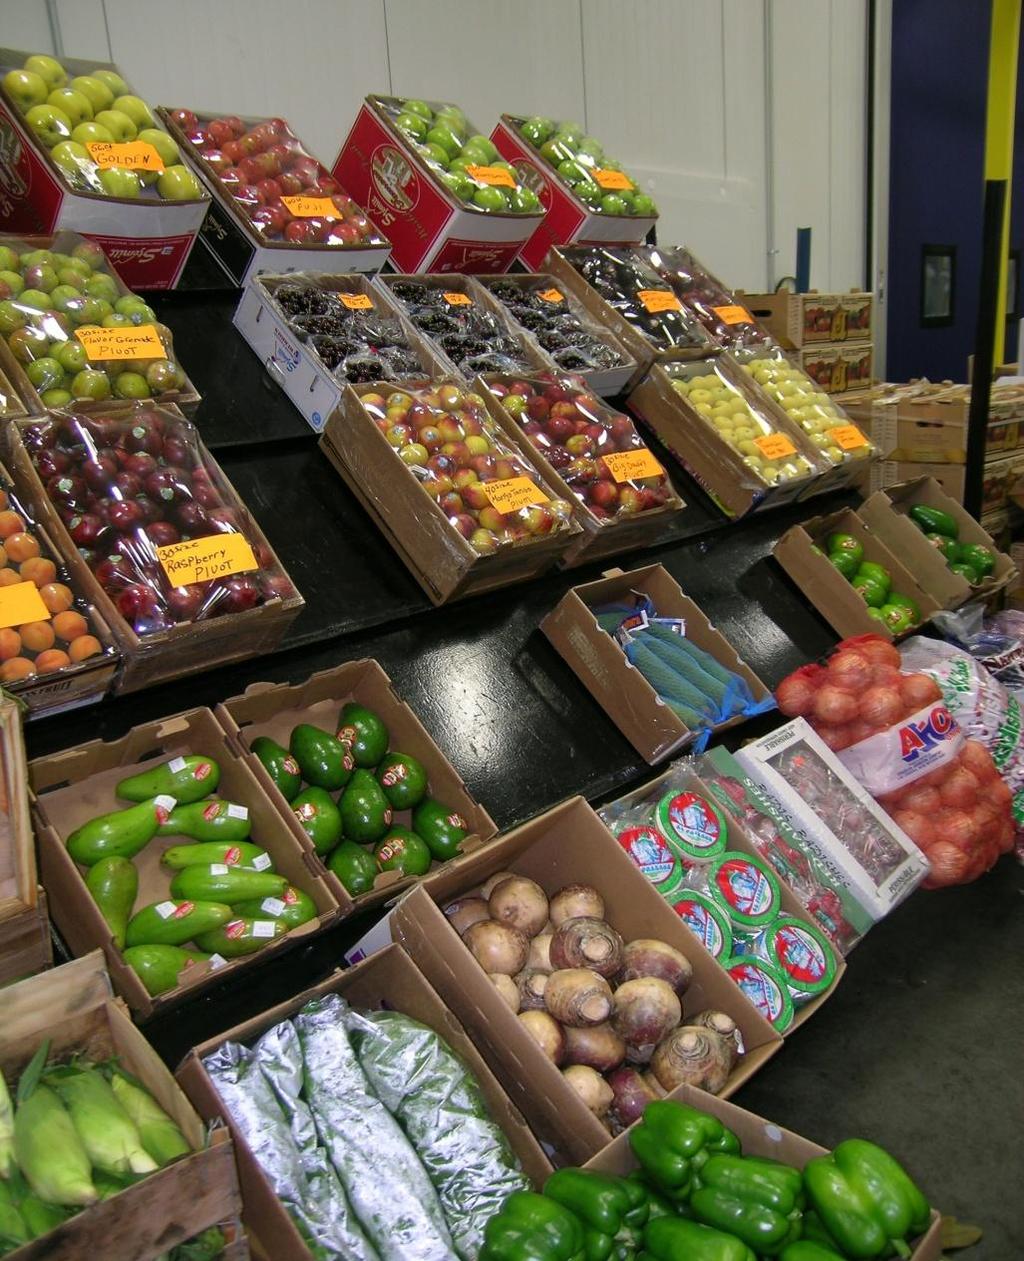 Perishables Fruit arrives into Philadelphia from Chile, Brazil, South Africa, and others.